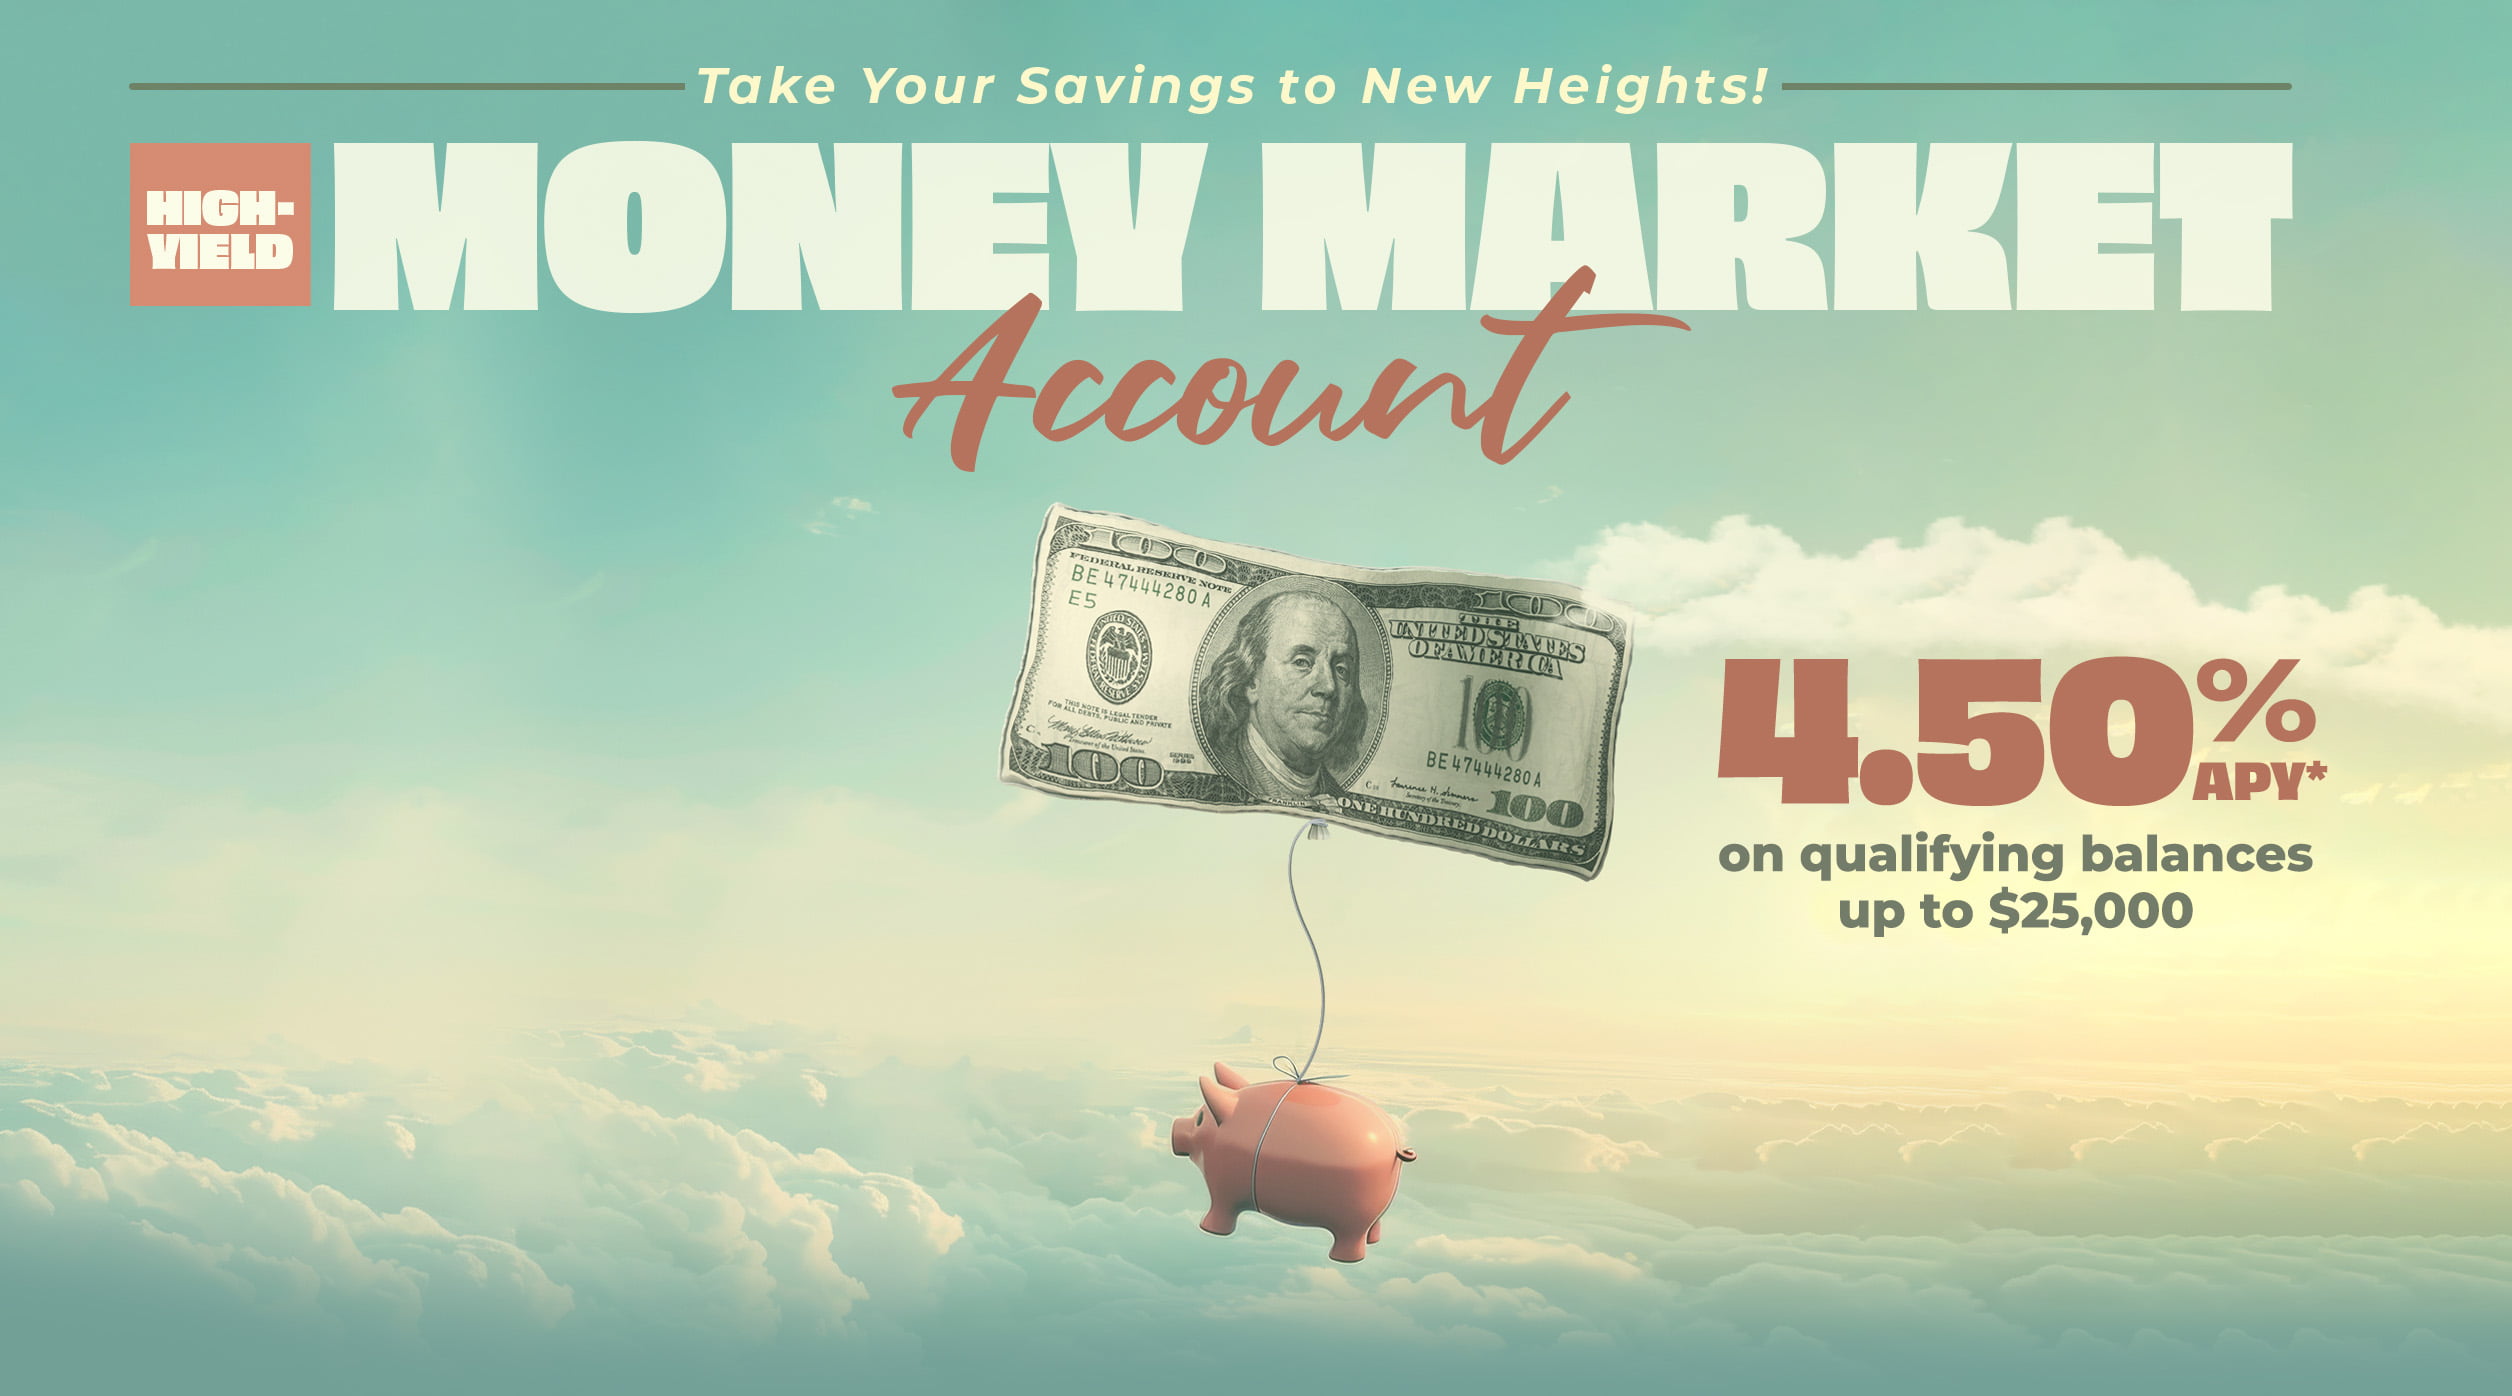 Take your savings to new heights - High Yield Money market account. 4.50% APY* on qualifying balances up to $25,000. 